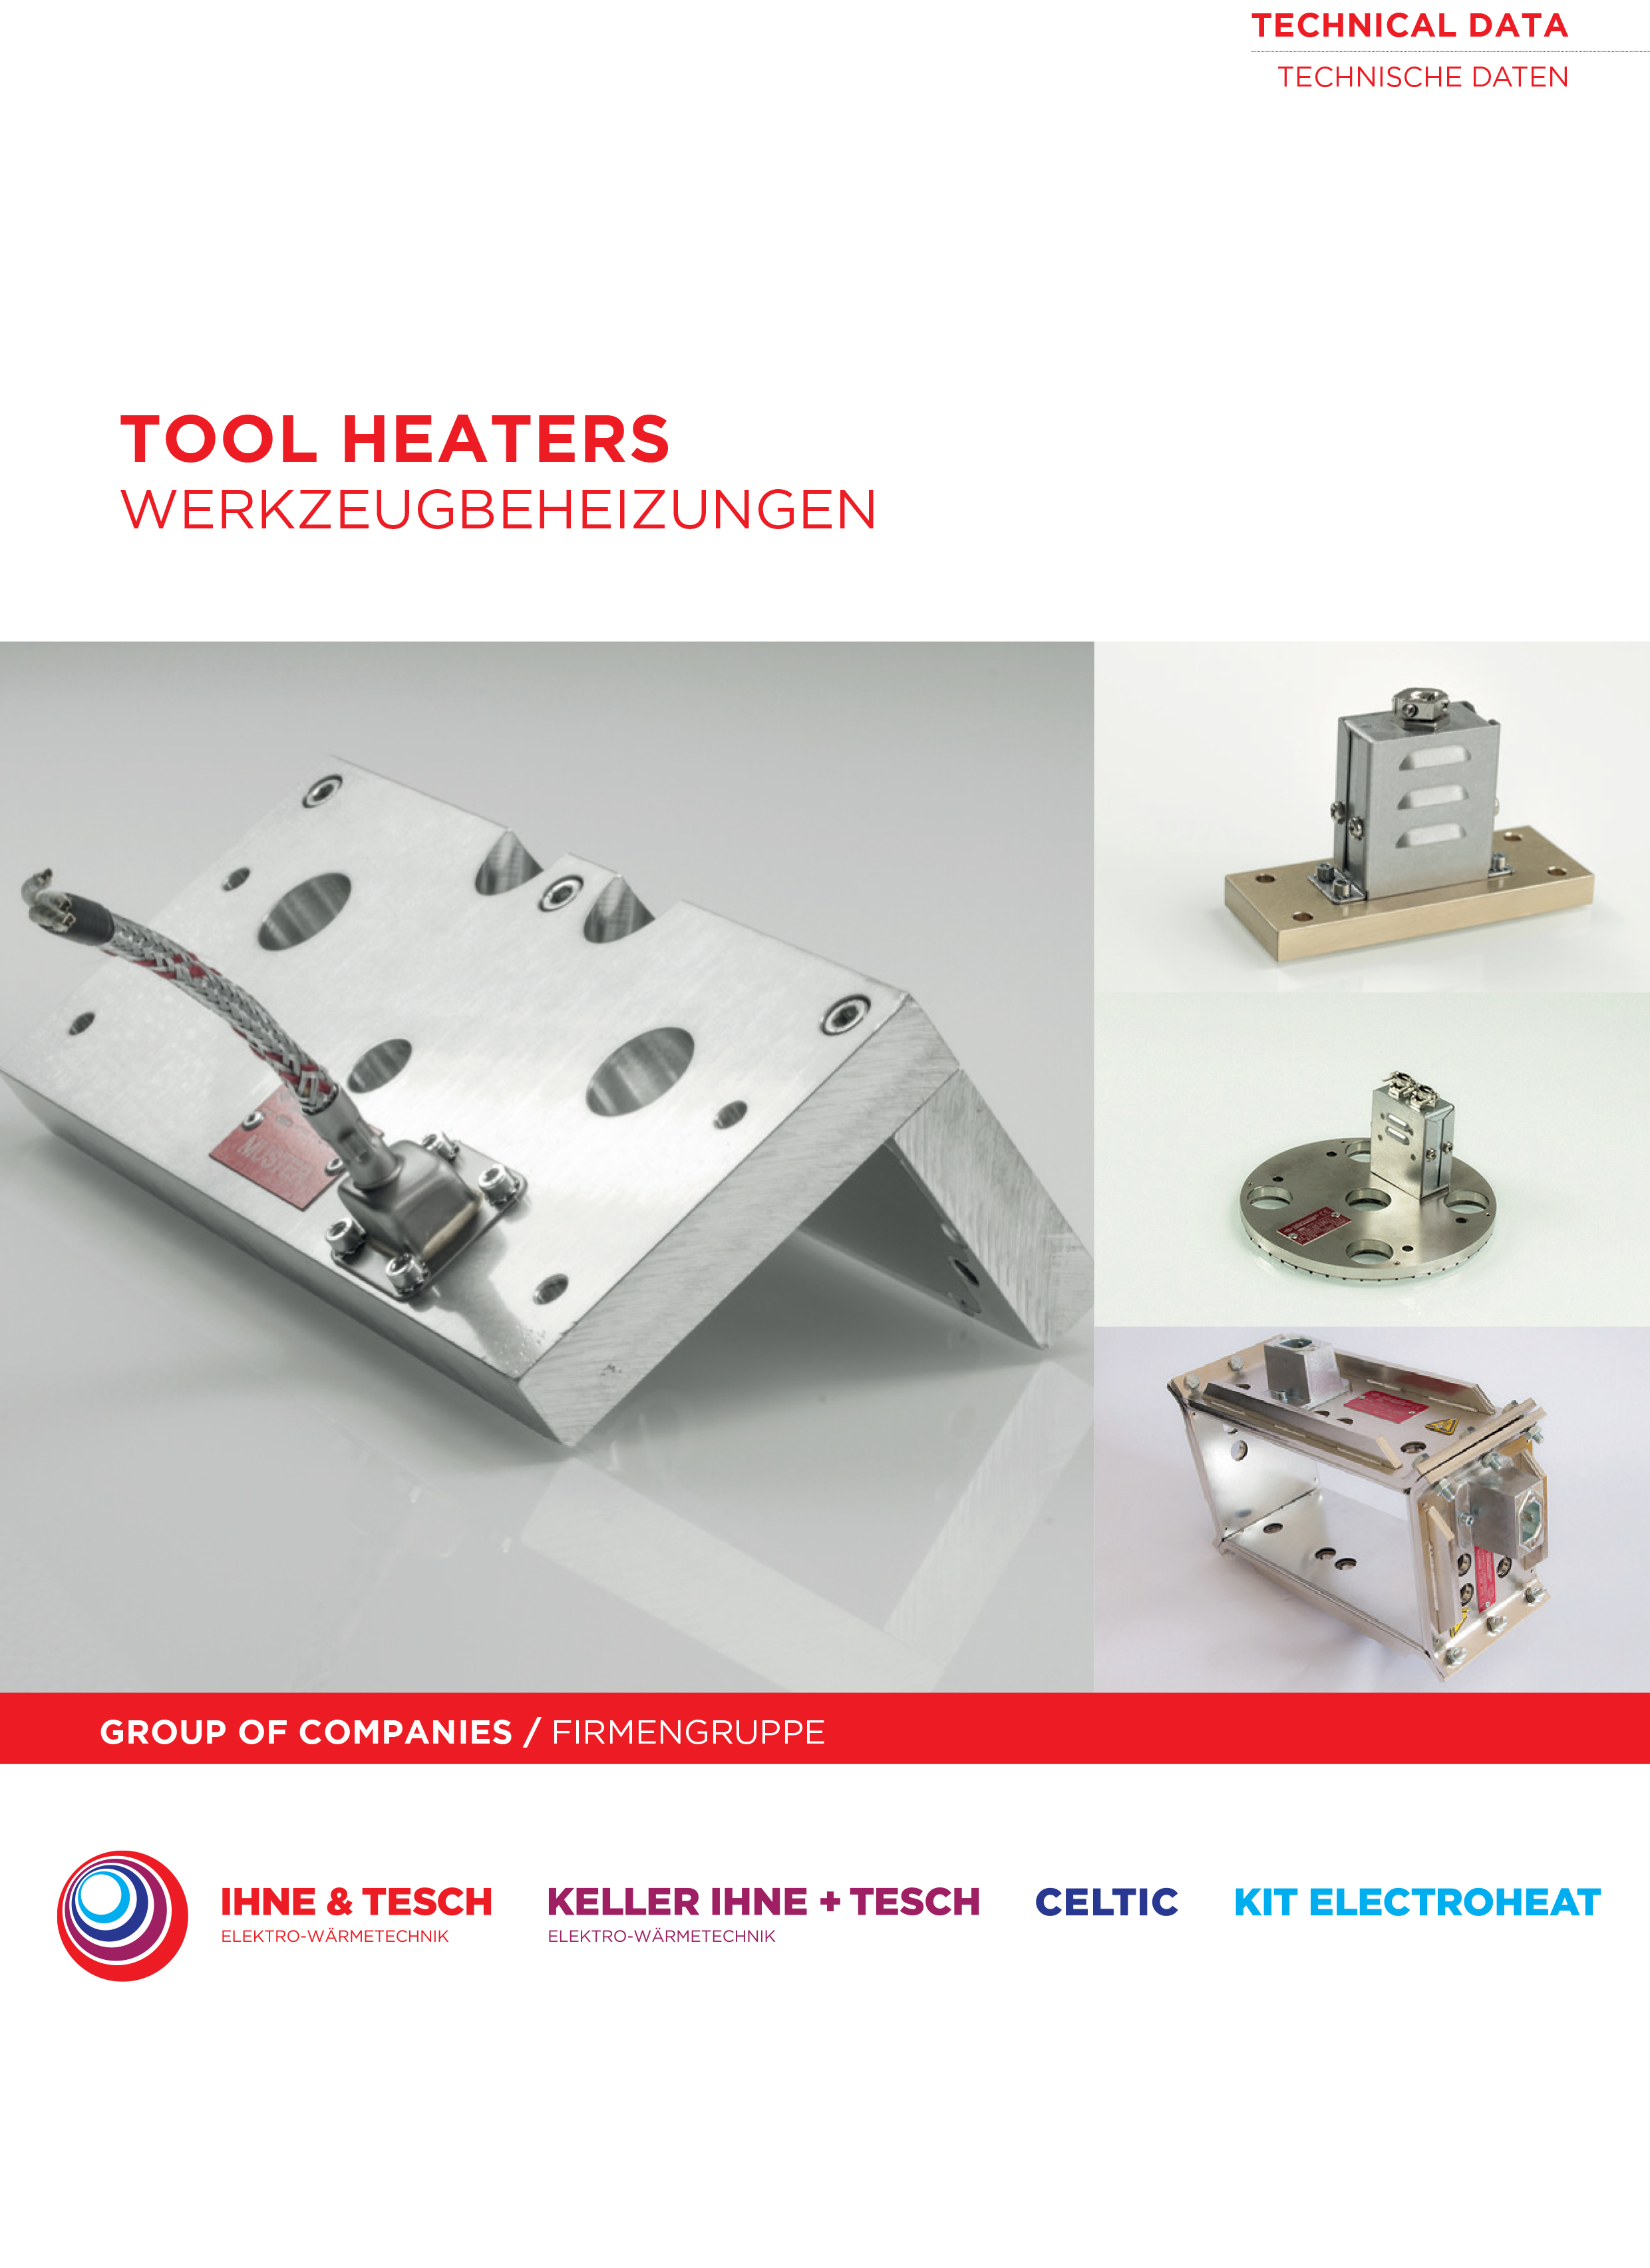 Tool-Heaters-technical-data